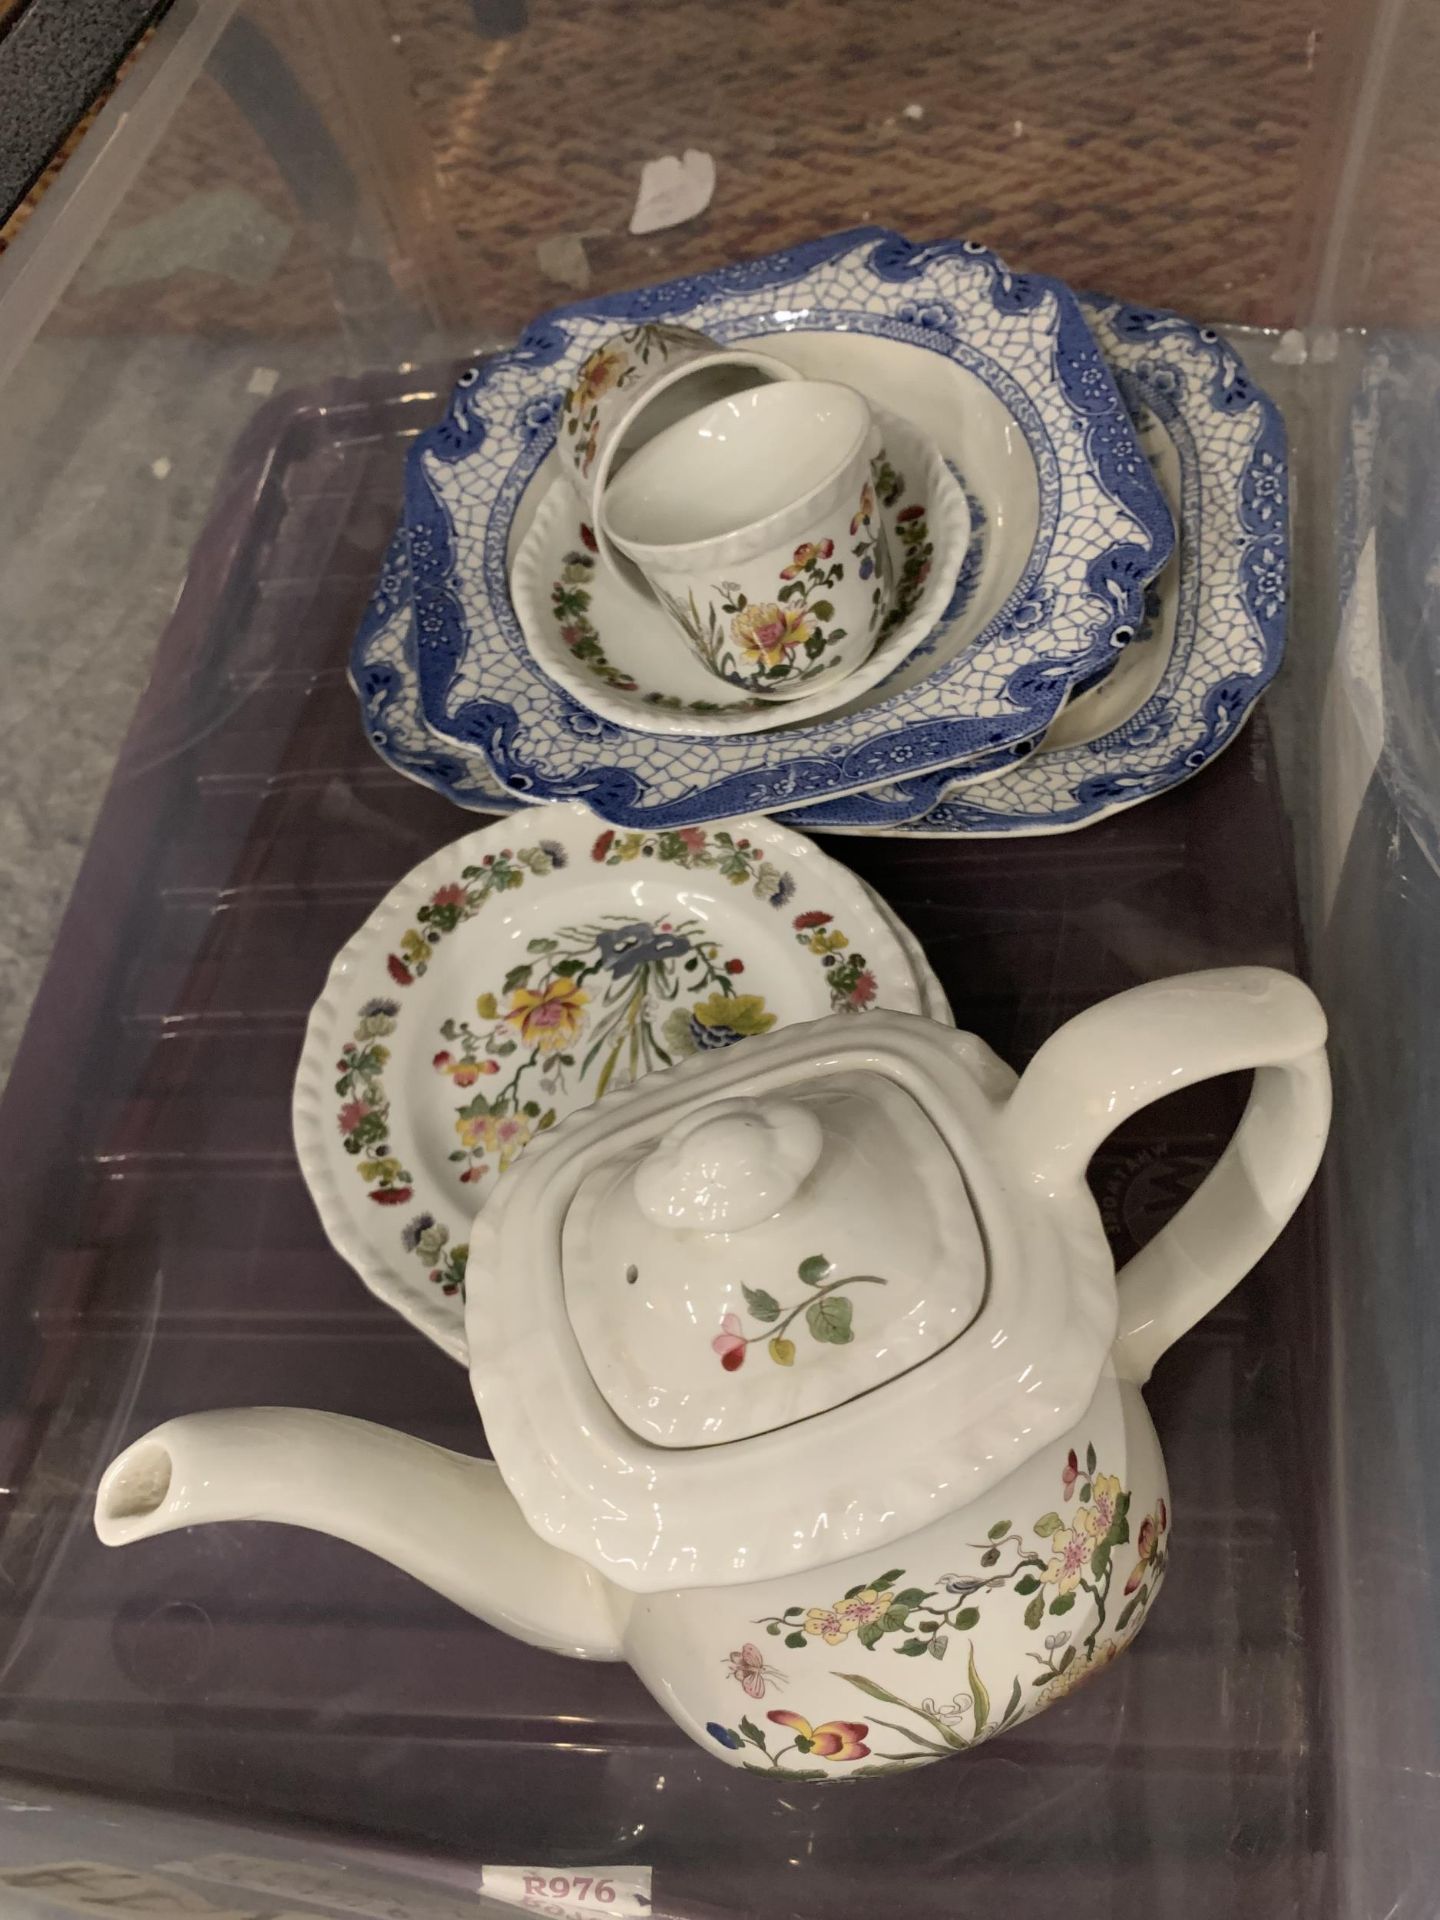 TWO BOXES OF ASSORTED ADAMS CHINA DINNER WARE - Image 6 of 8